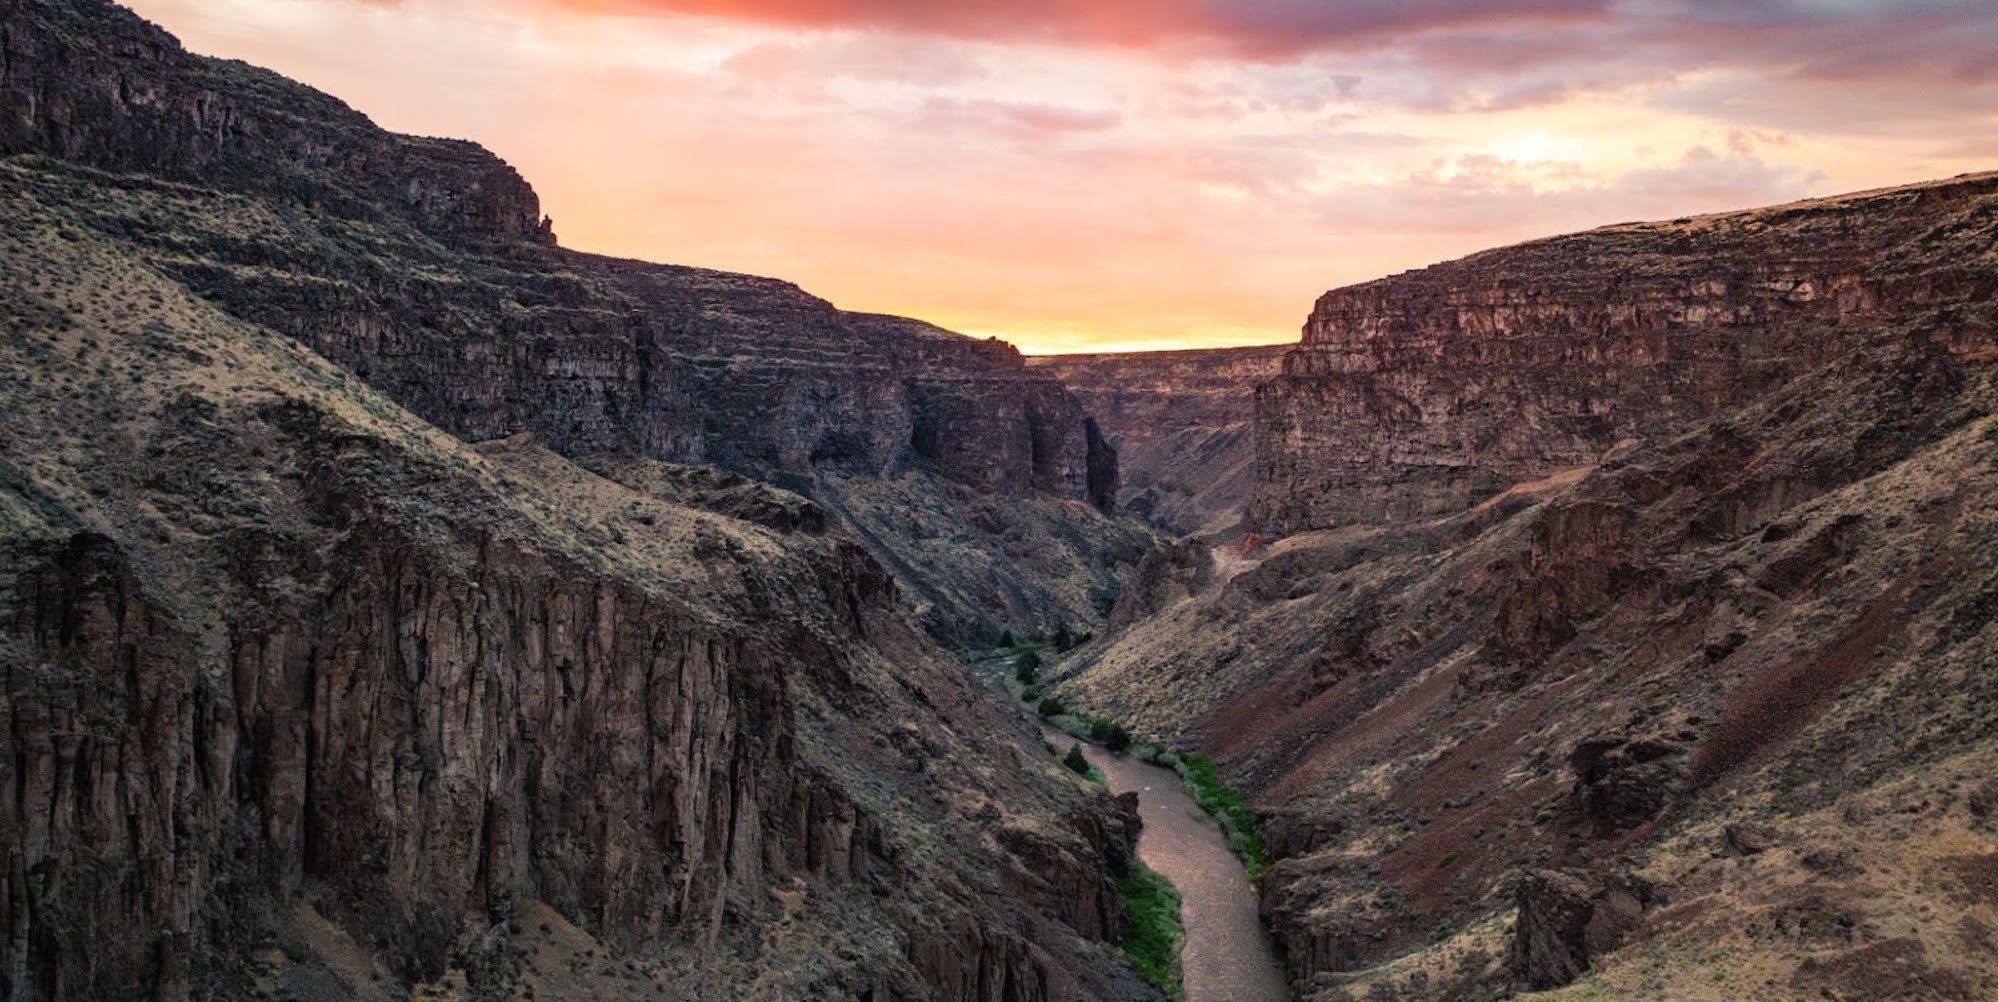 Drone shot of the Bruneau River canyon in Idaho at sunset